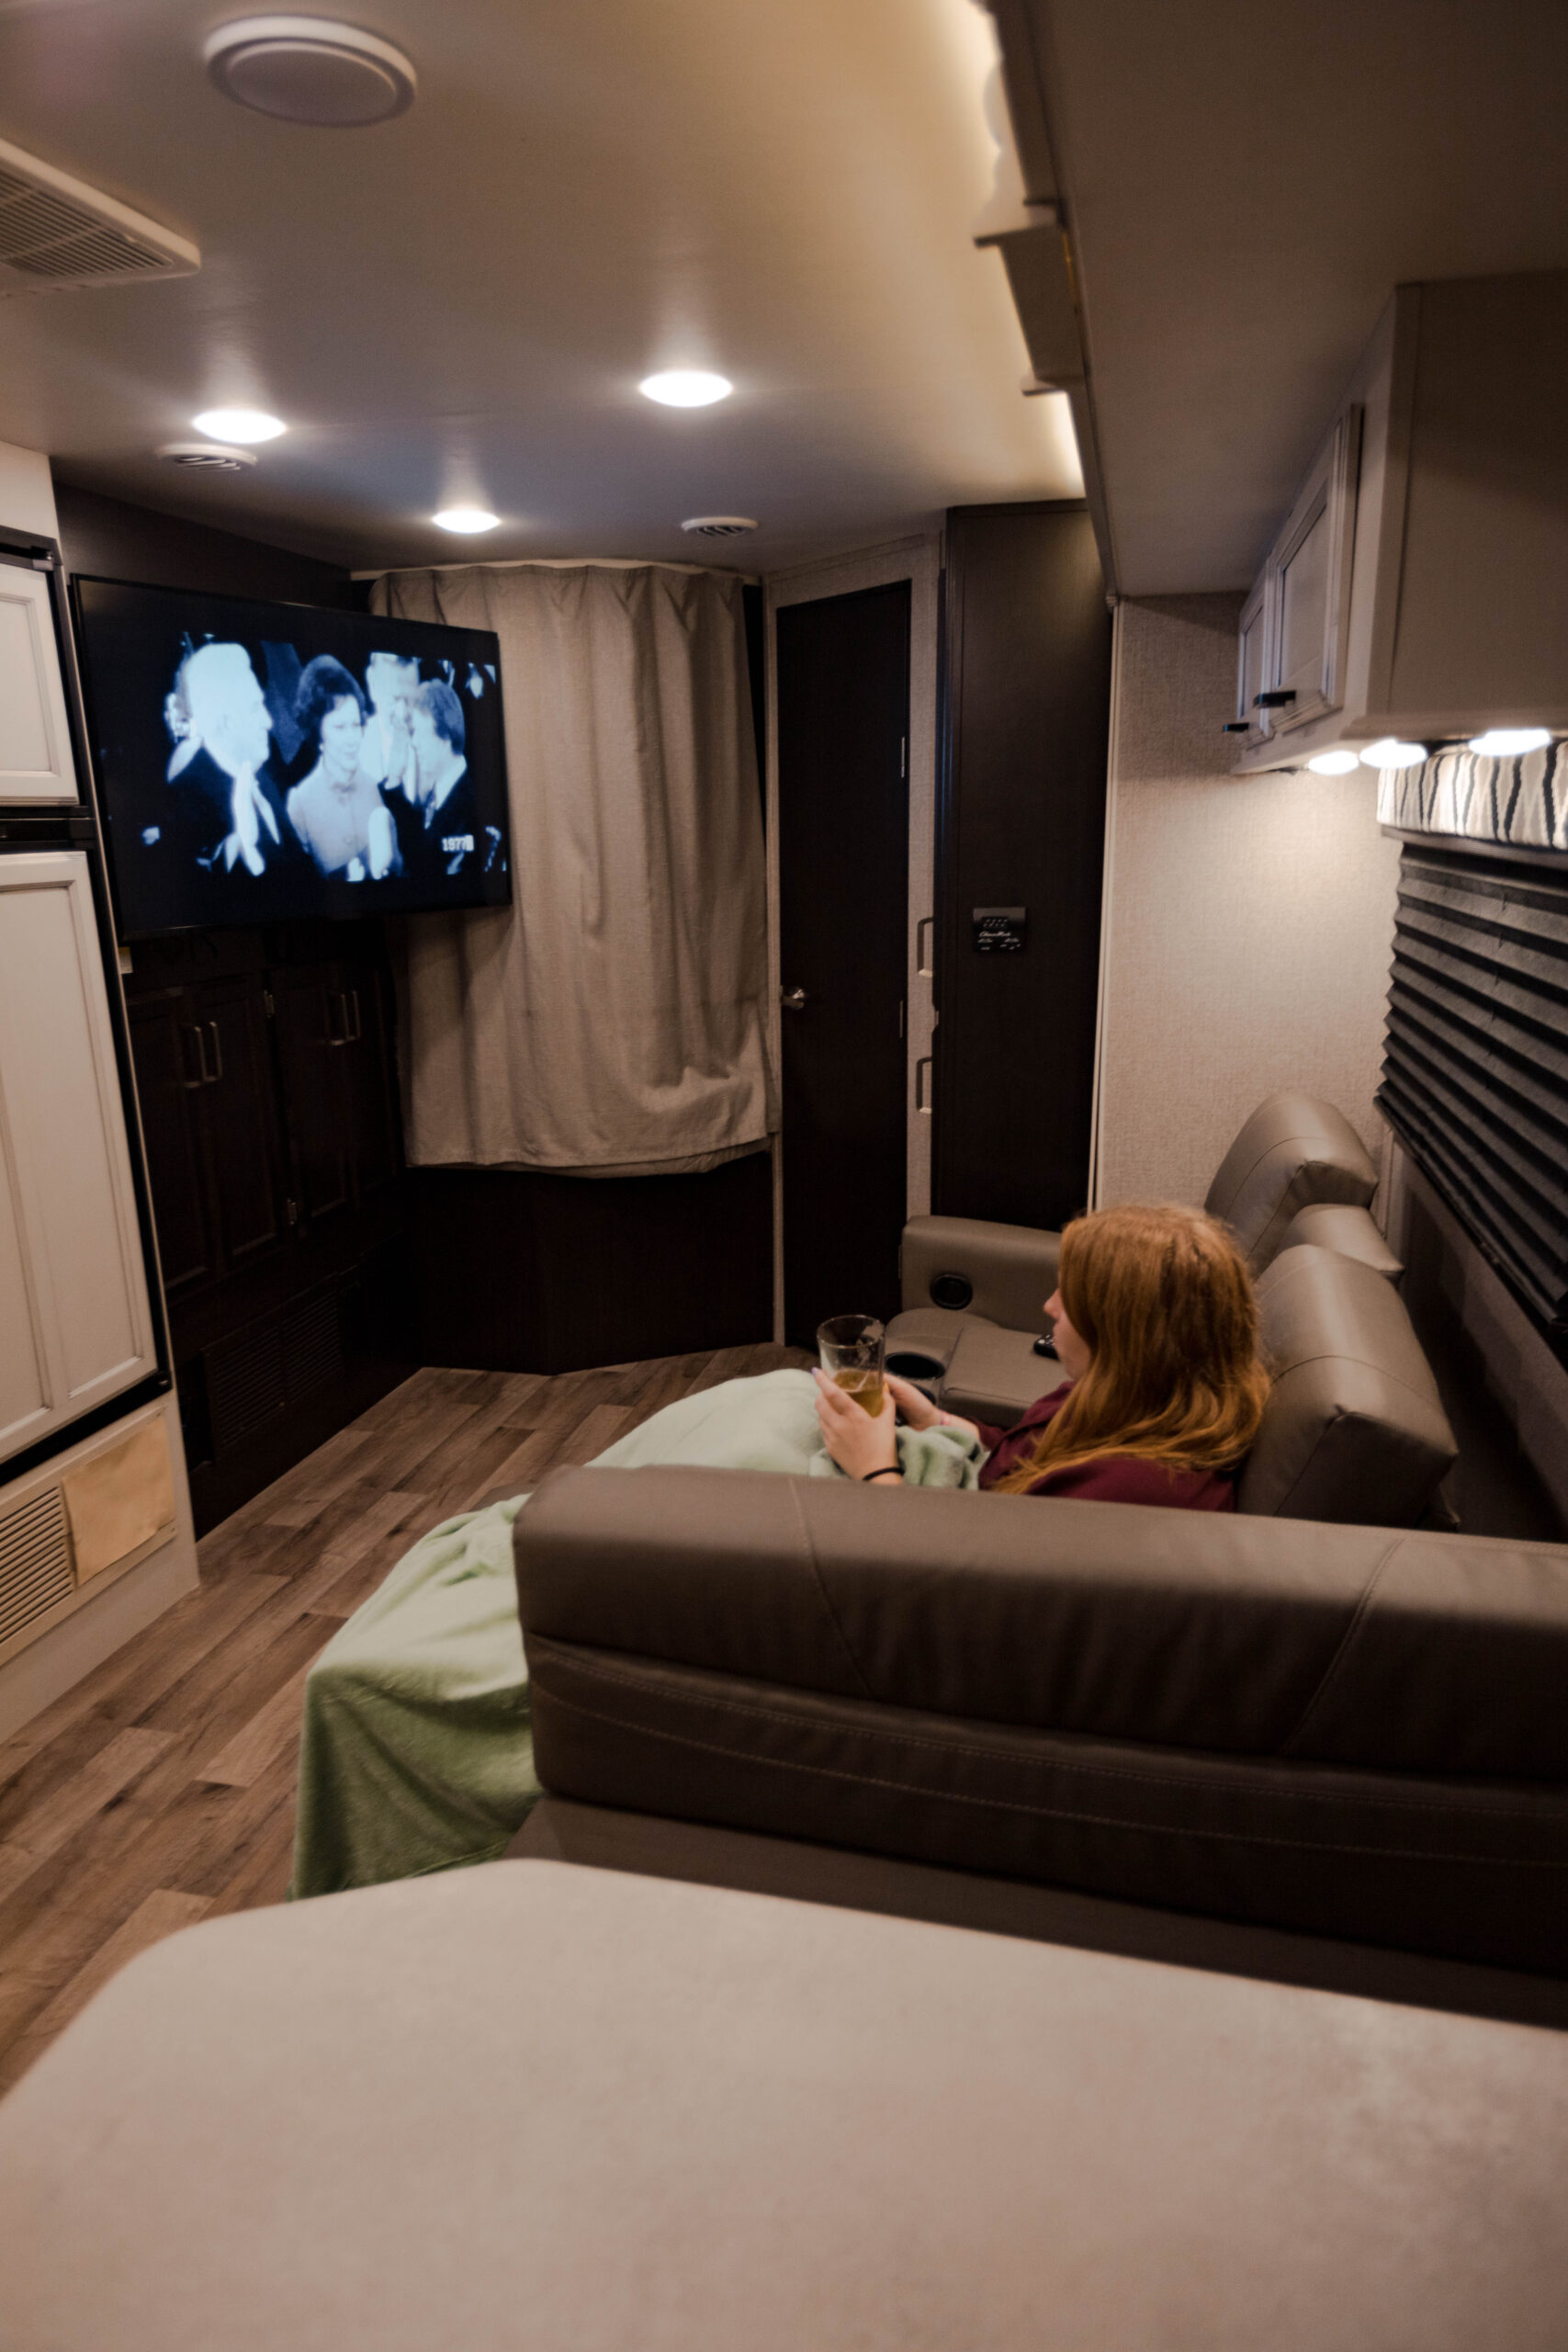 How To Watch TV In RV Without Cable – TinyHouseDesign